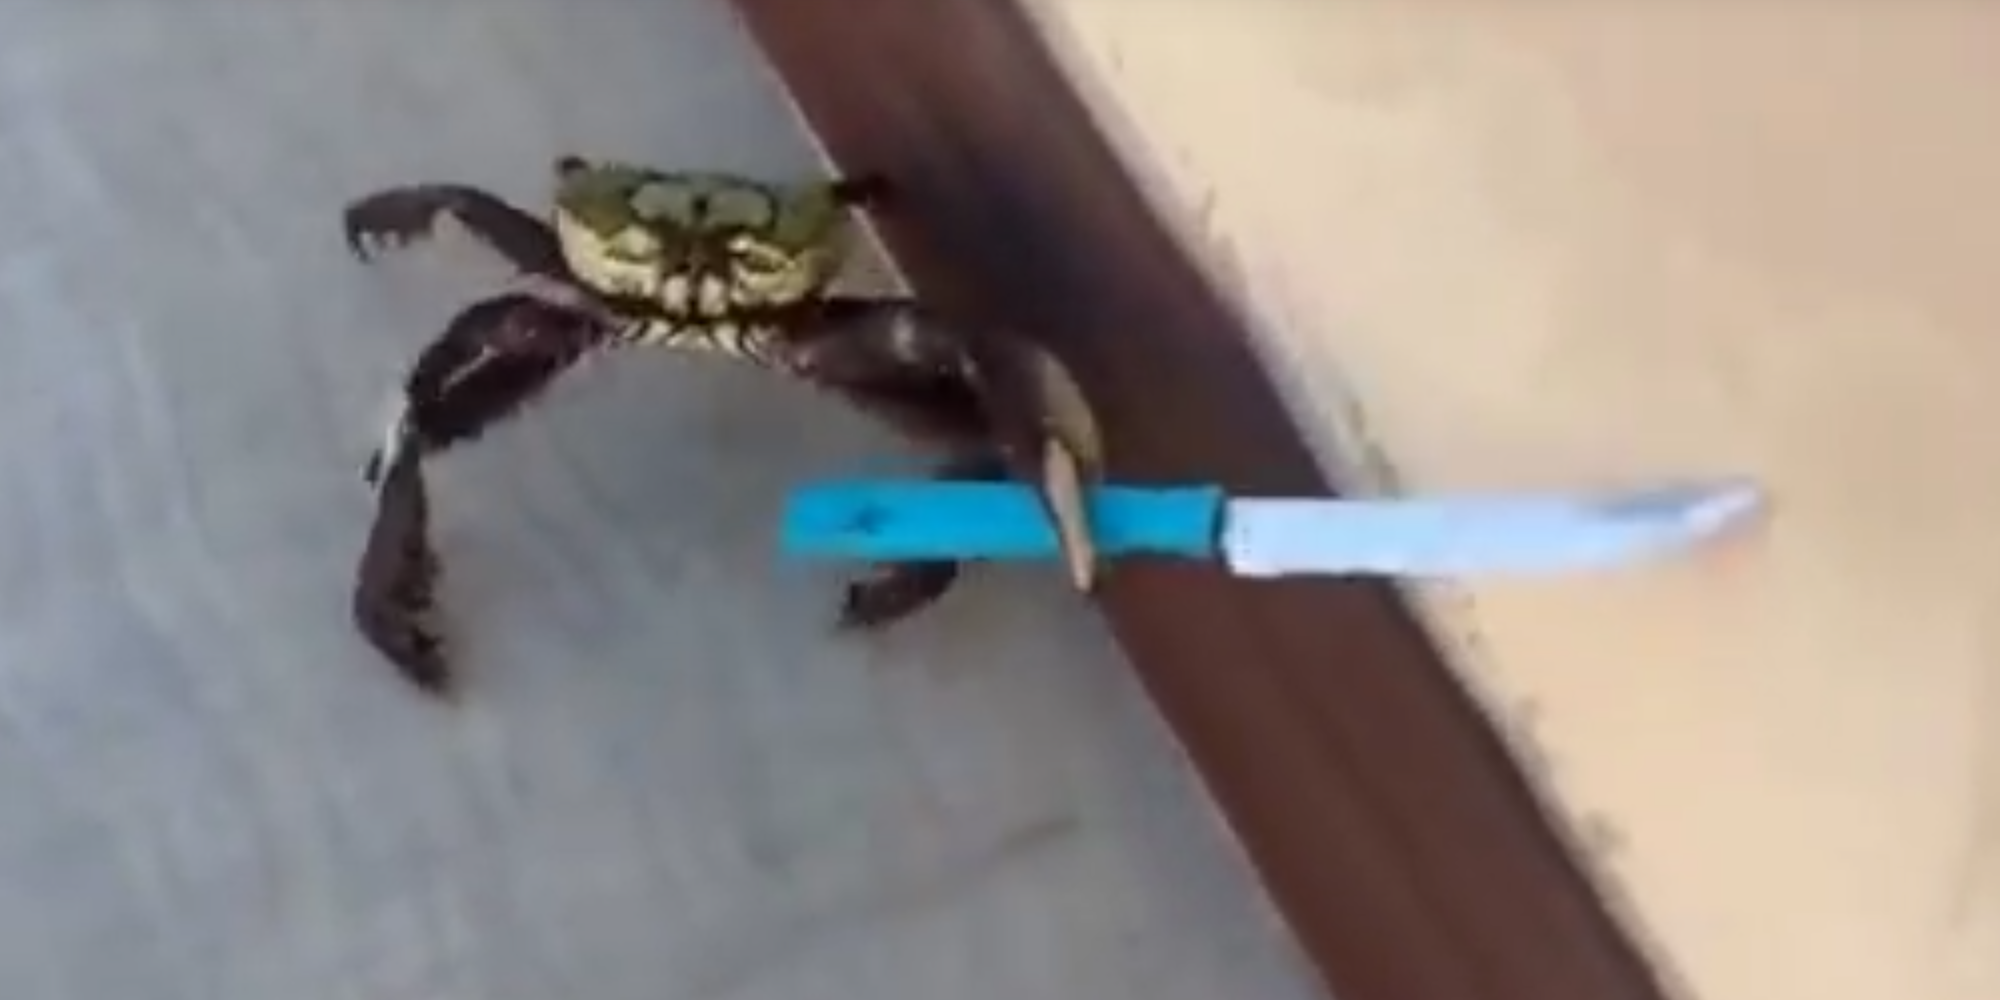 Are We Facing an Epidemic of Knife-Wielding Crabs?